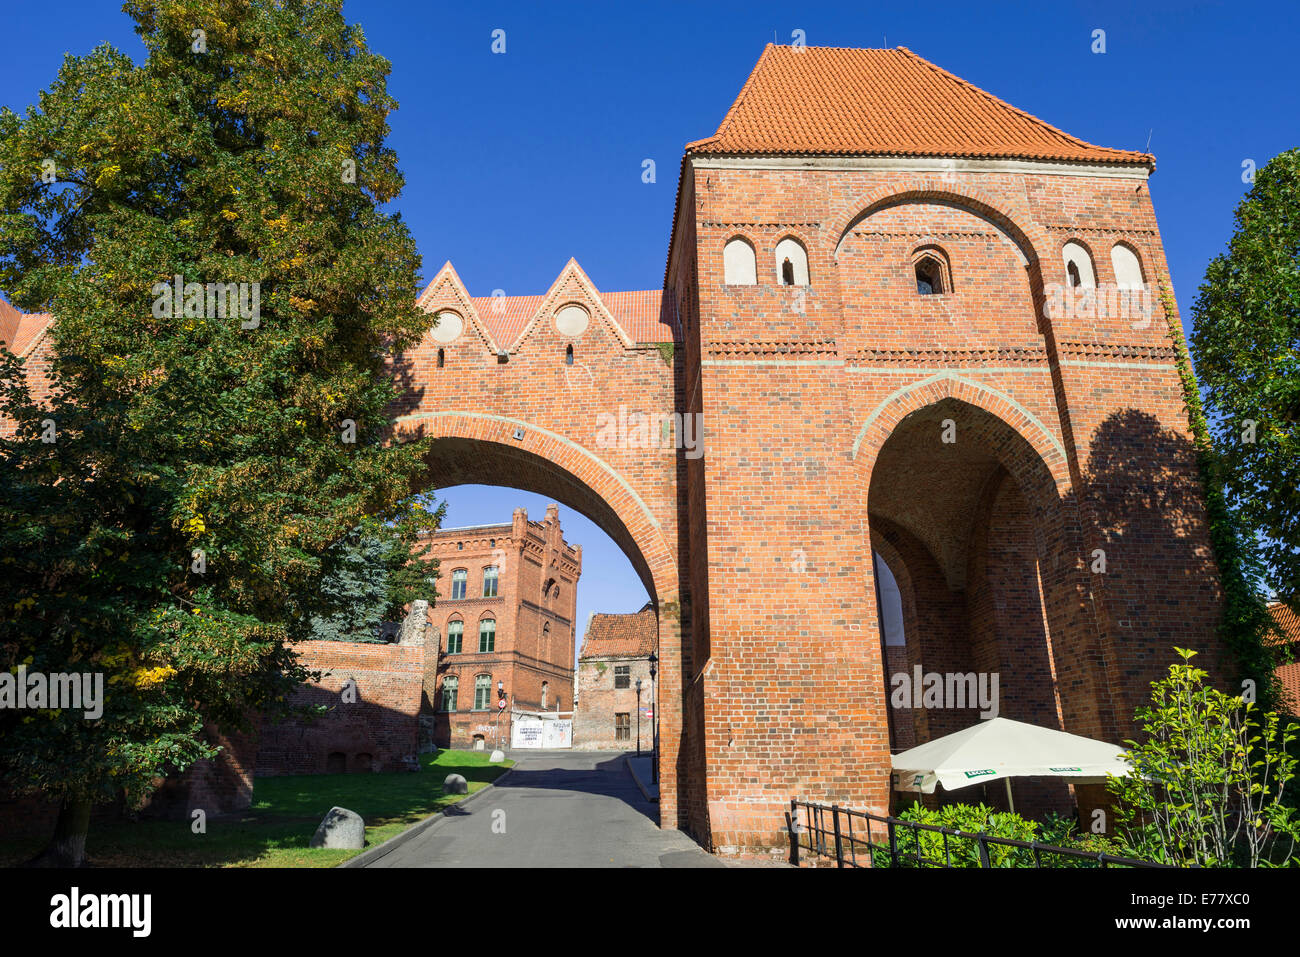 The Gate and the tower of the city wall, Toruń, Kujawy-Pomerania Province, Poland Stock Photo